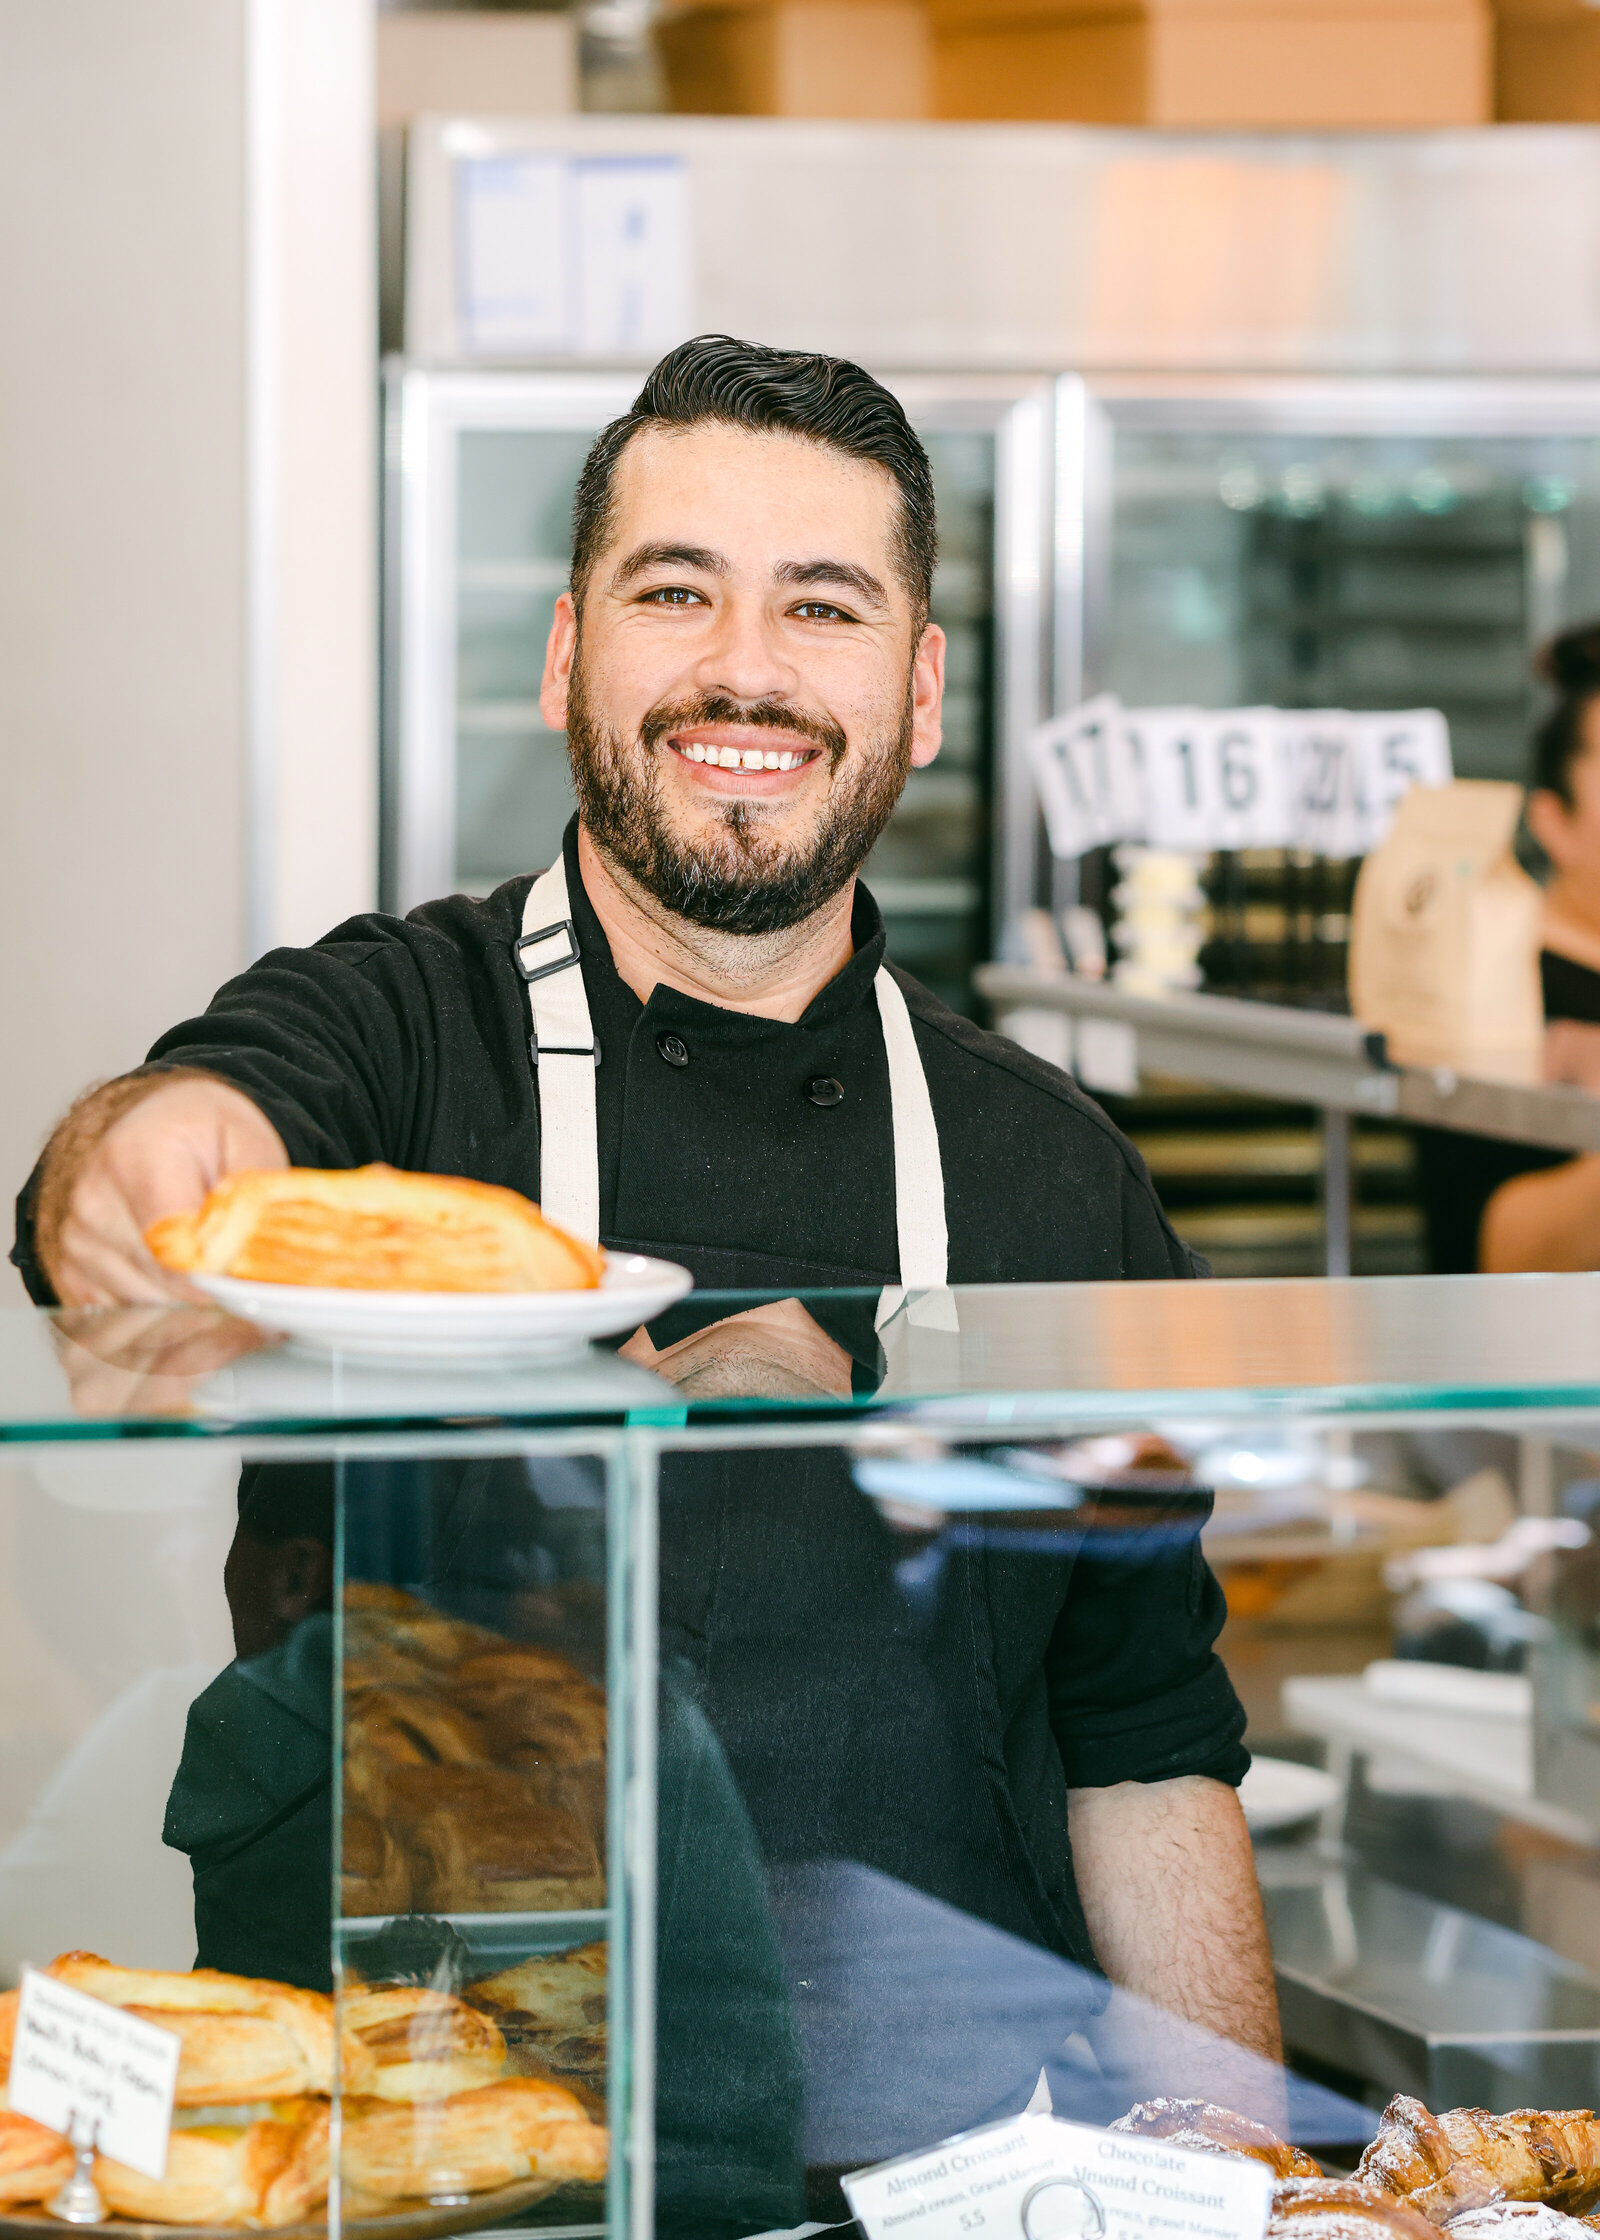 baker serving croissant pastry at bakery friendly smiling over counter